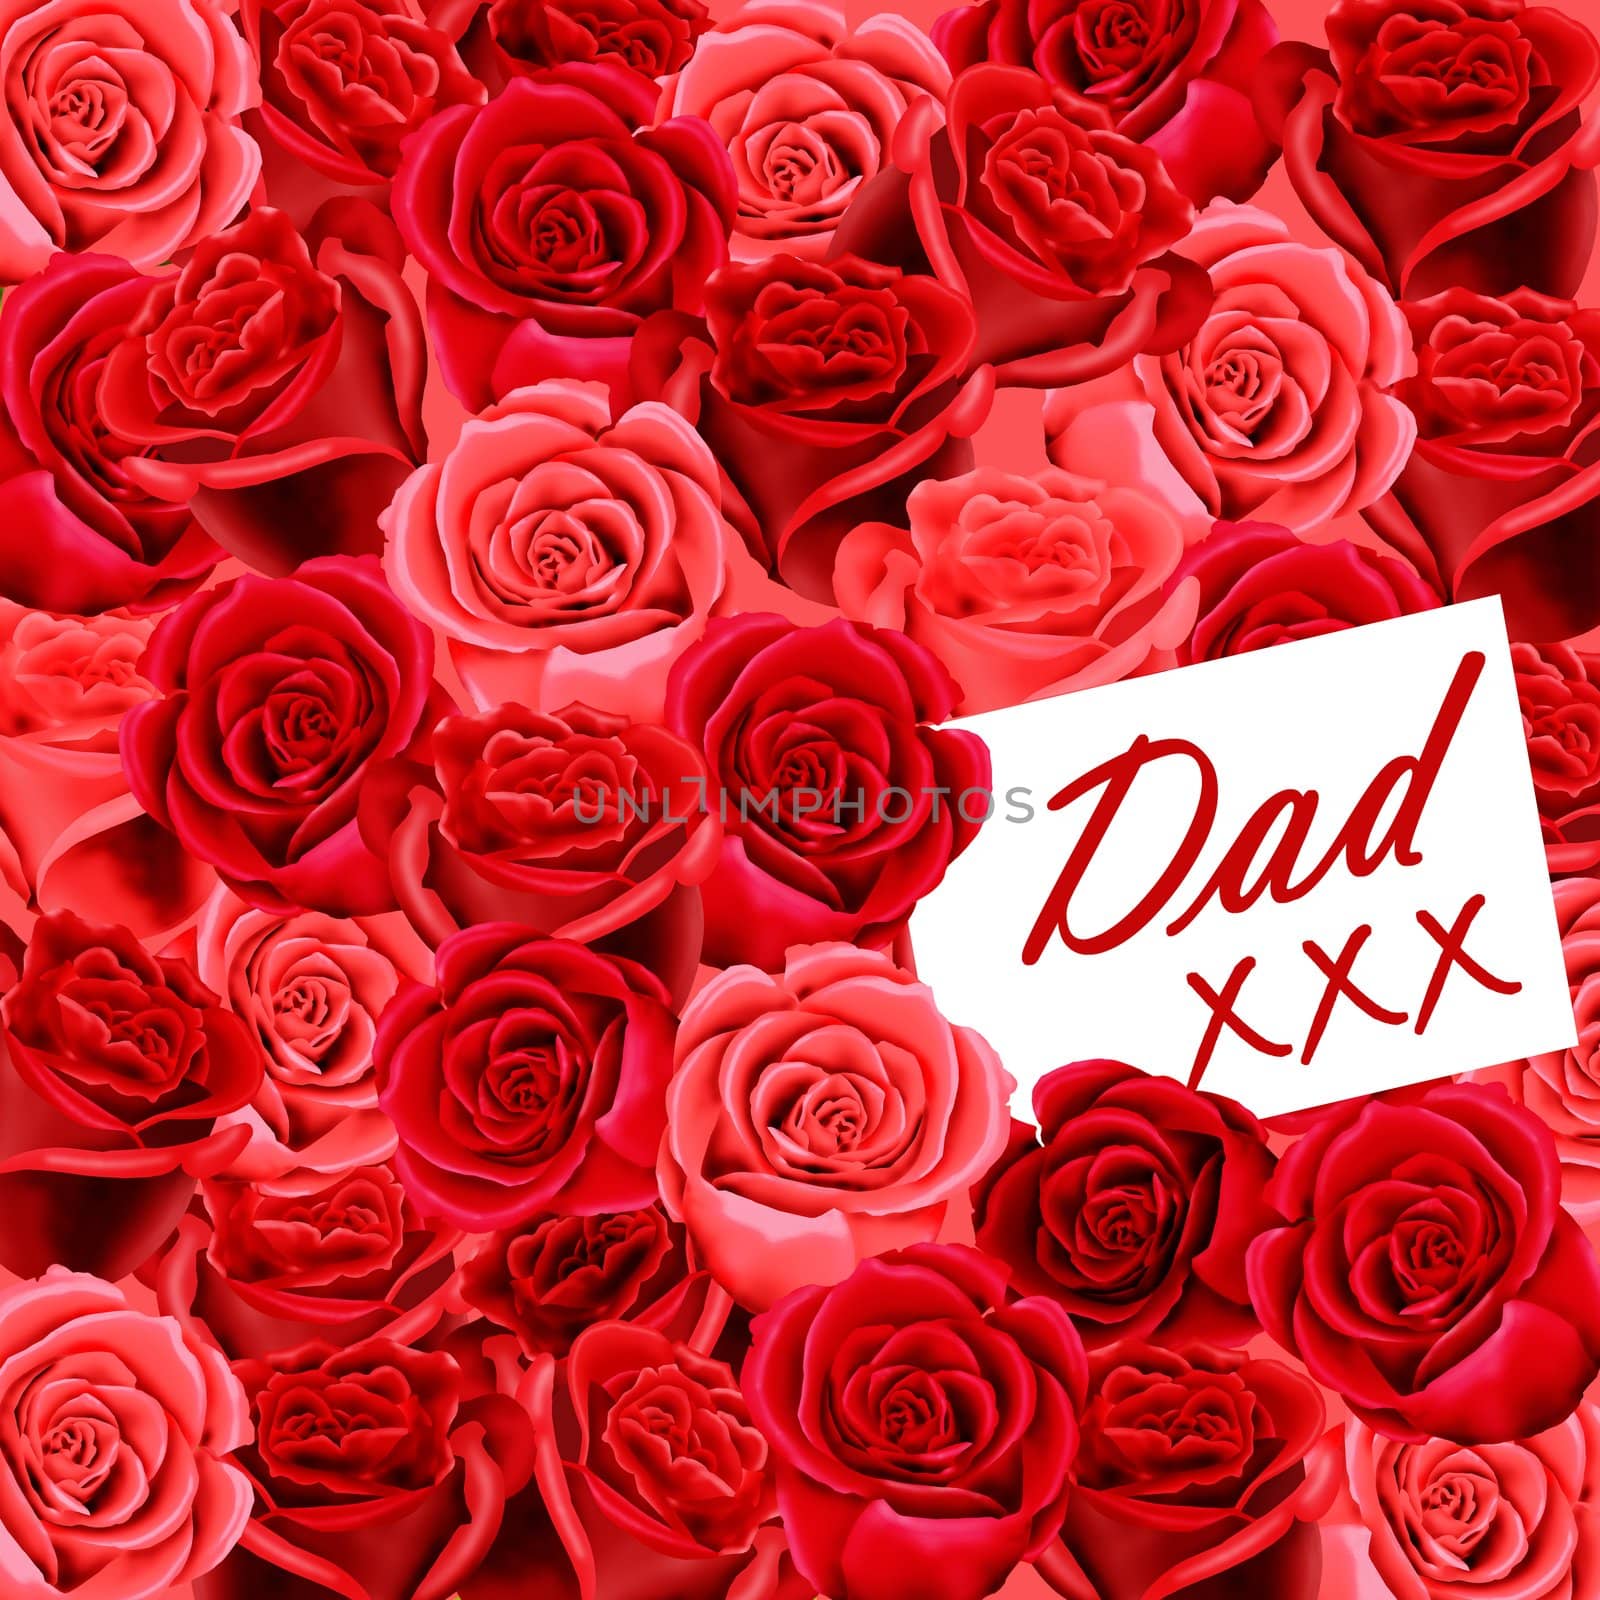 Dad xxx on a card on a wallpaper of red roses